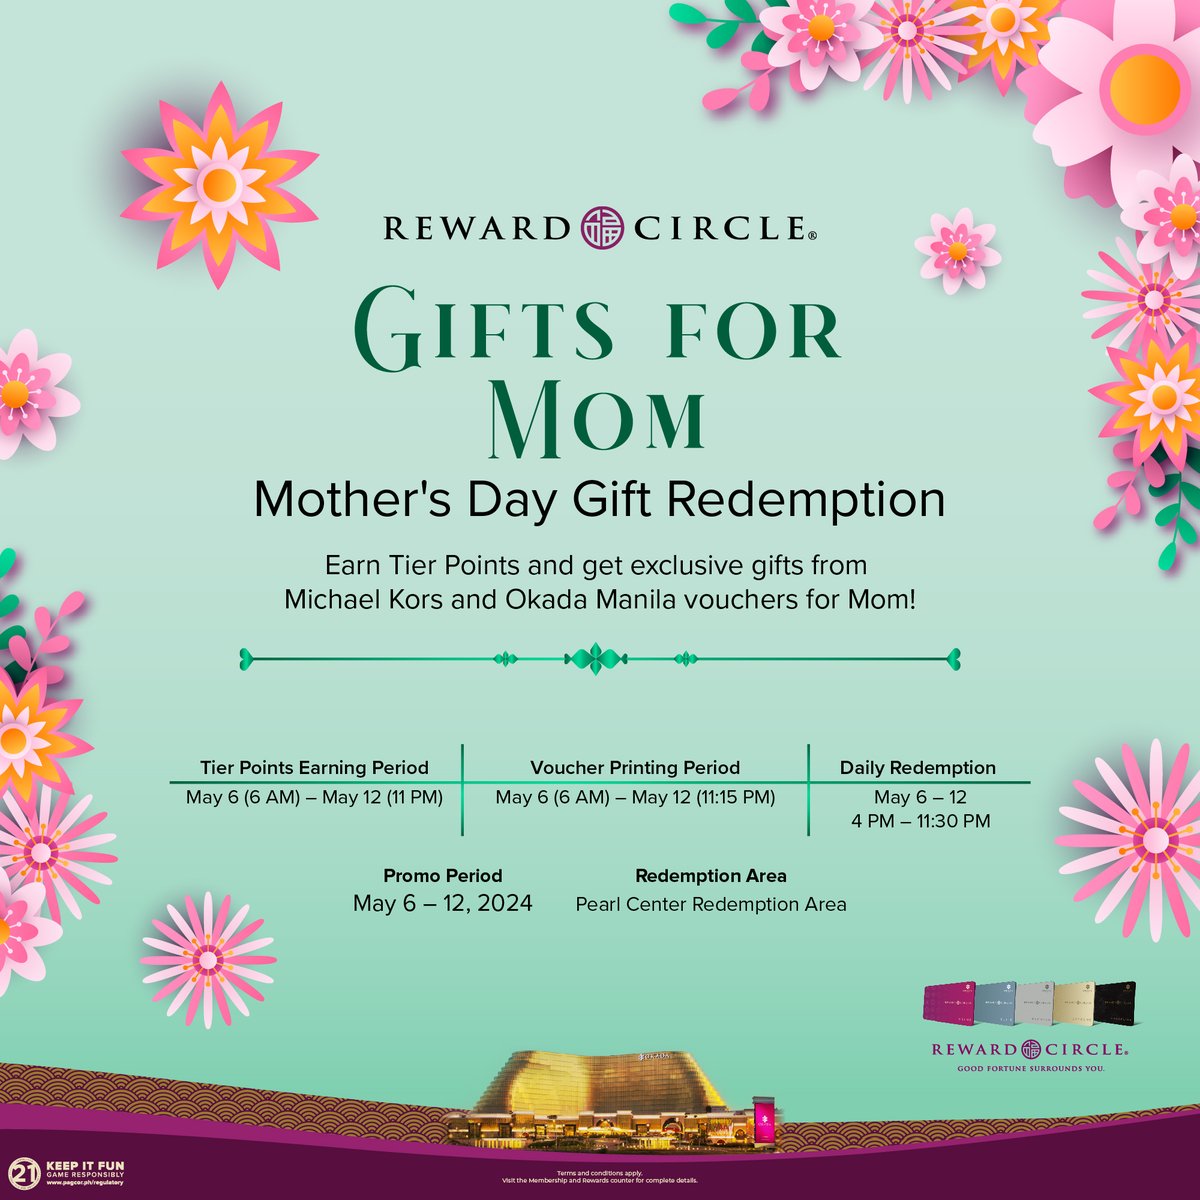 Make this Mother's Day one to remember! Earn the required Tier Points from May 6 to 12, 2024 to score exclusive Michael Kors items and Okada Manila vouchers for Mom. Learn more: okdmnl.ph/PamperHerWithP…